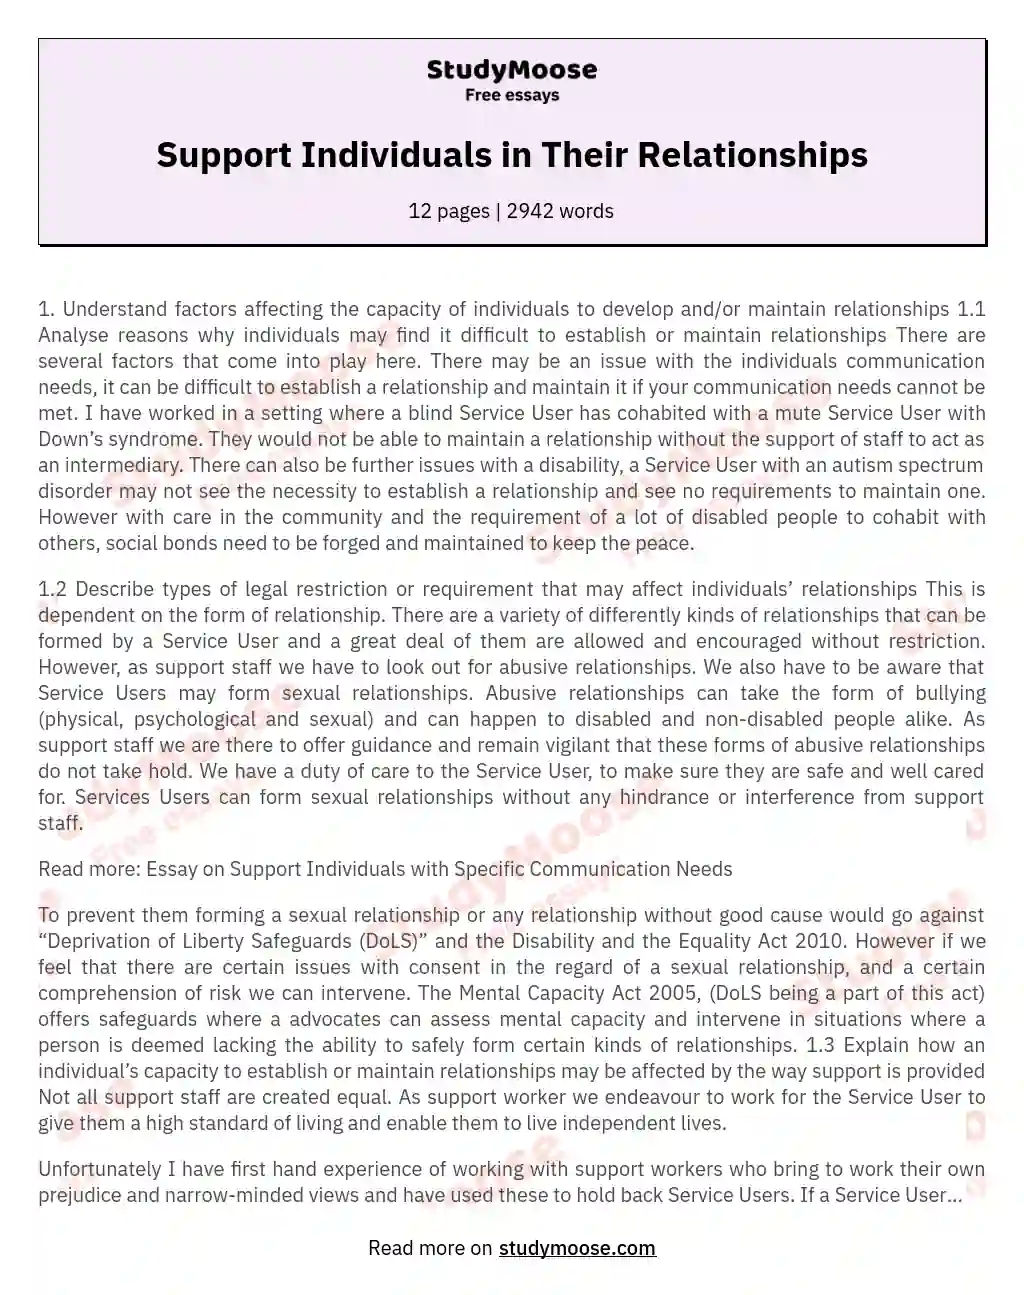 Support Individuals in Their Relationships essay